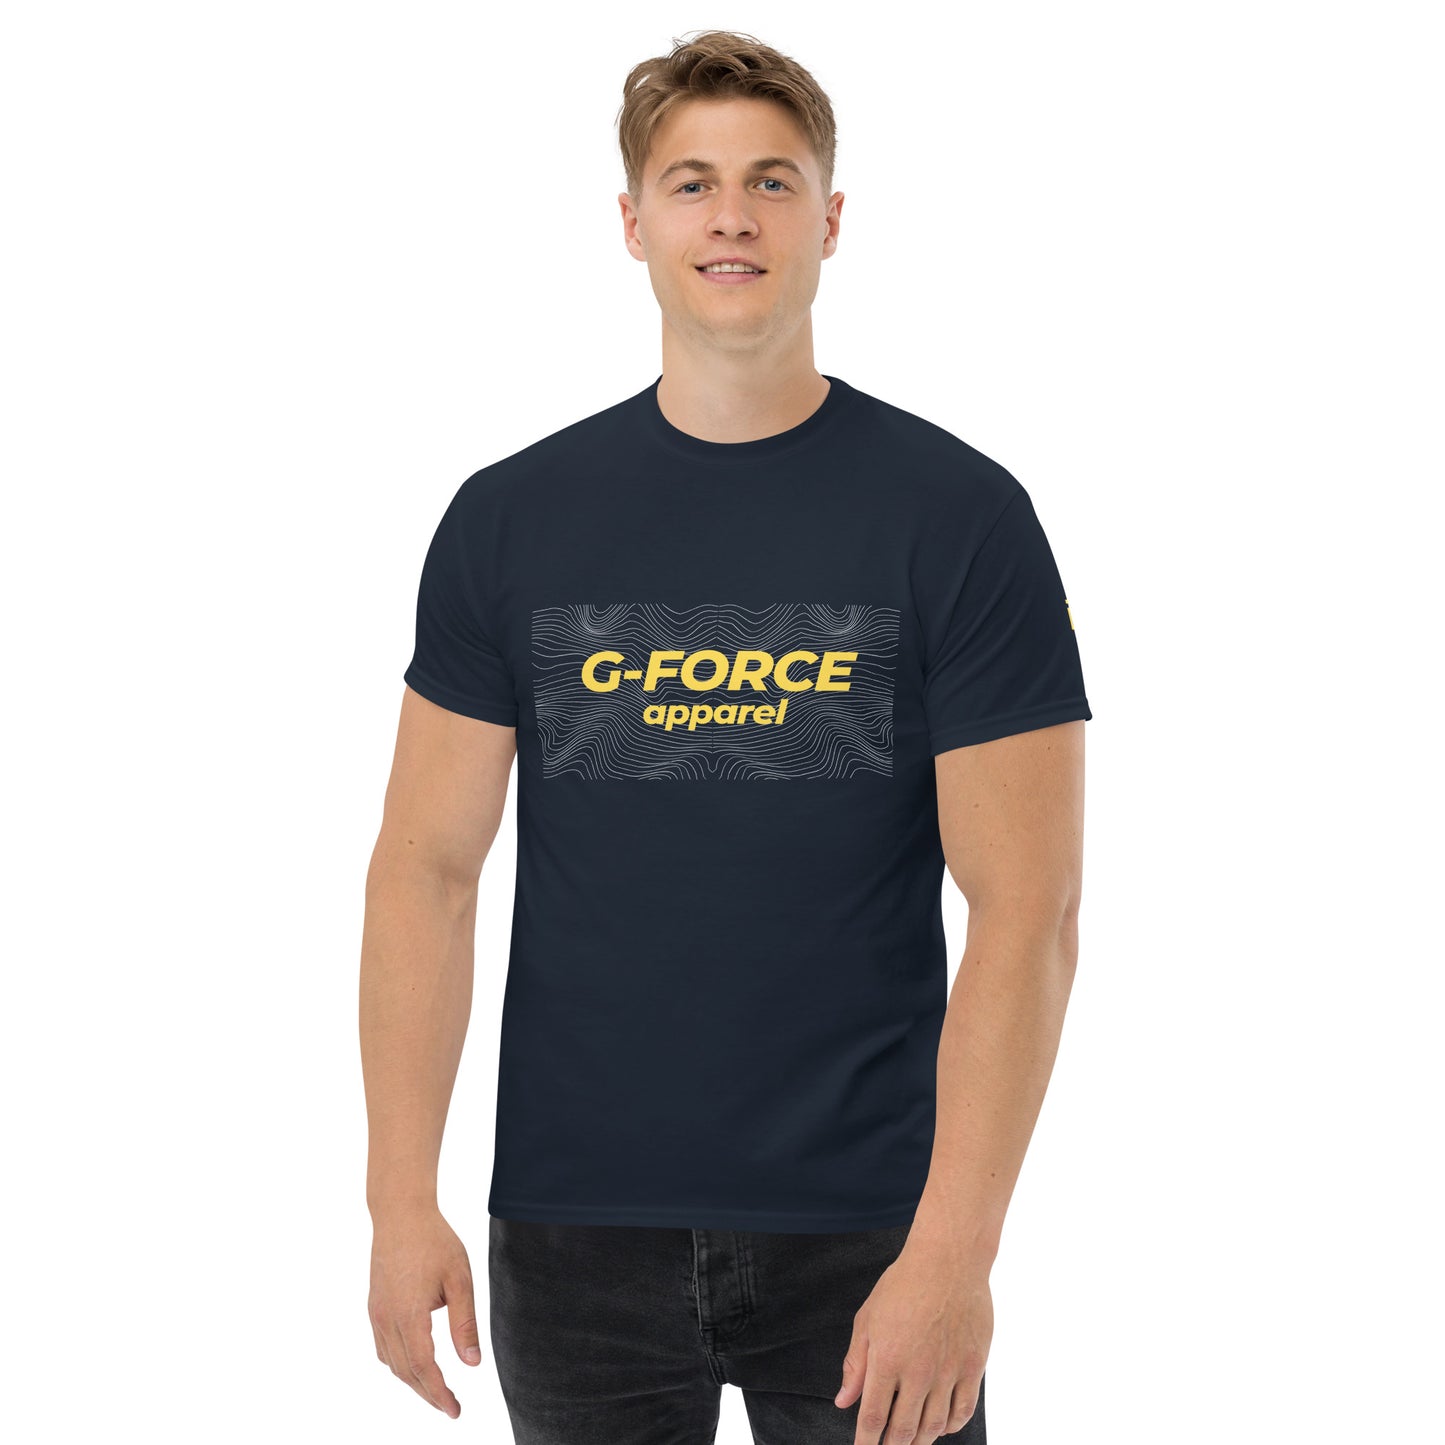 G-FORCE APPAREL wave tee